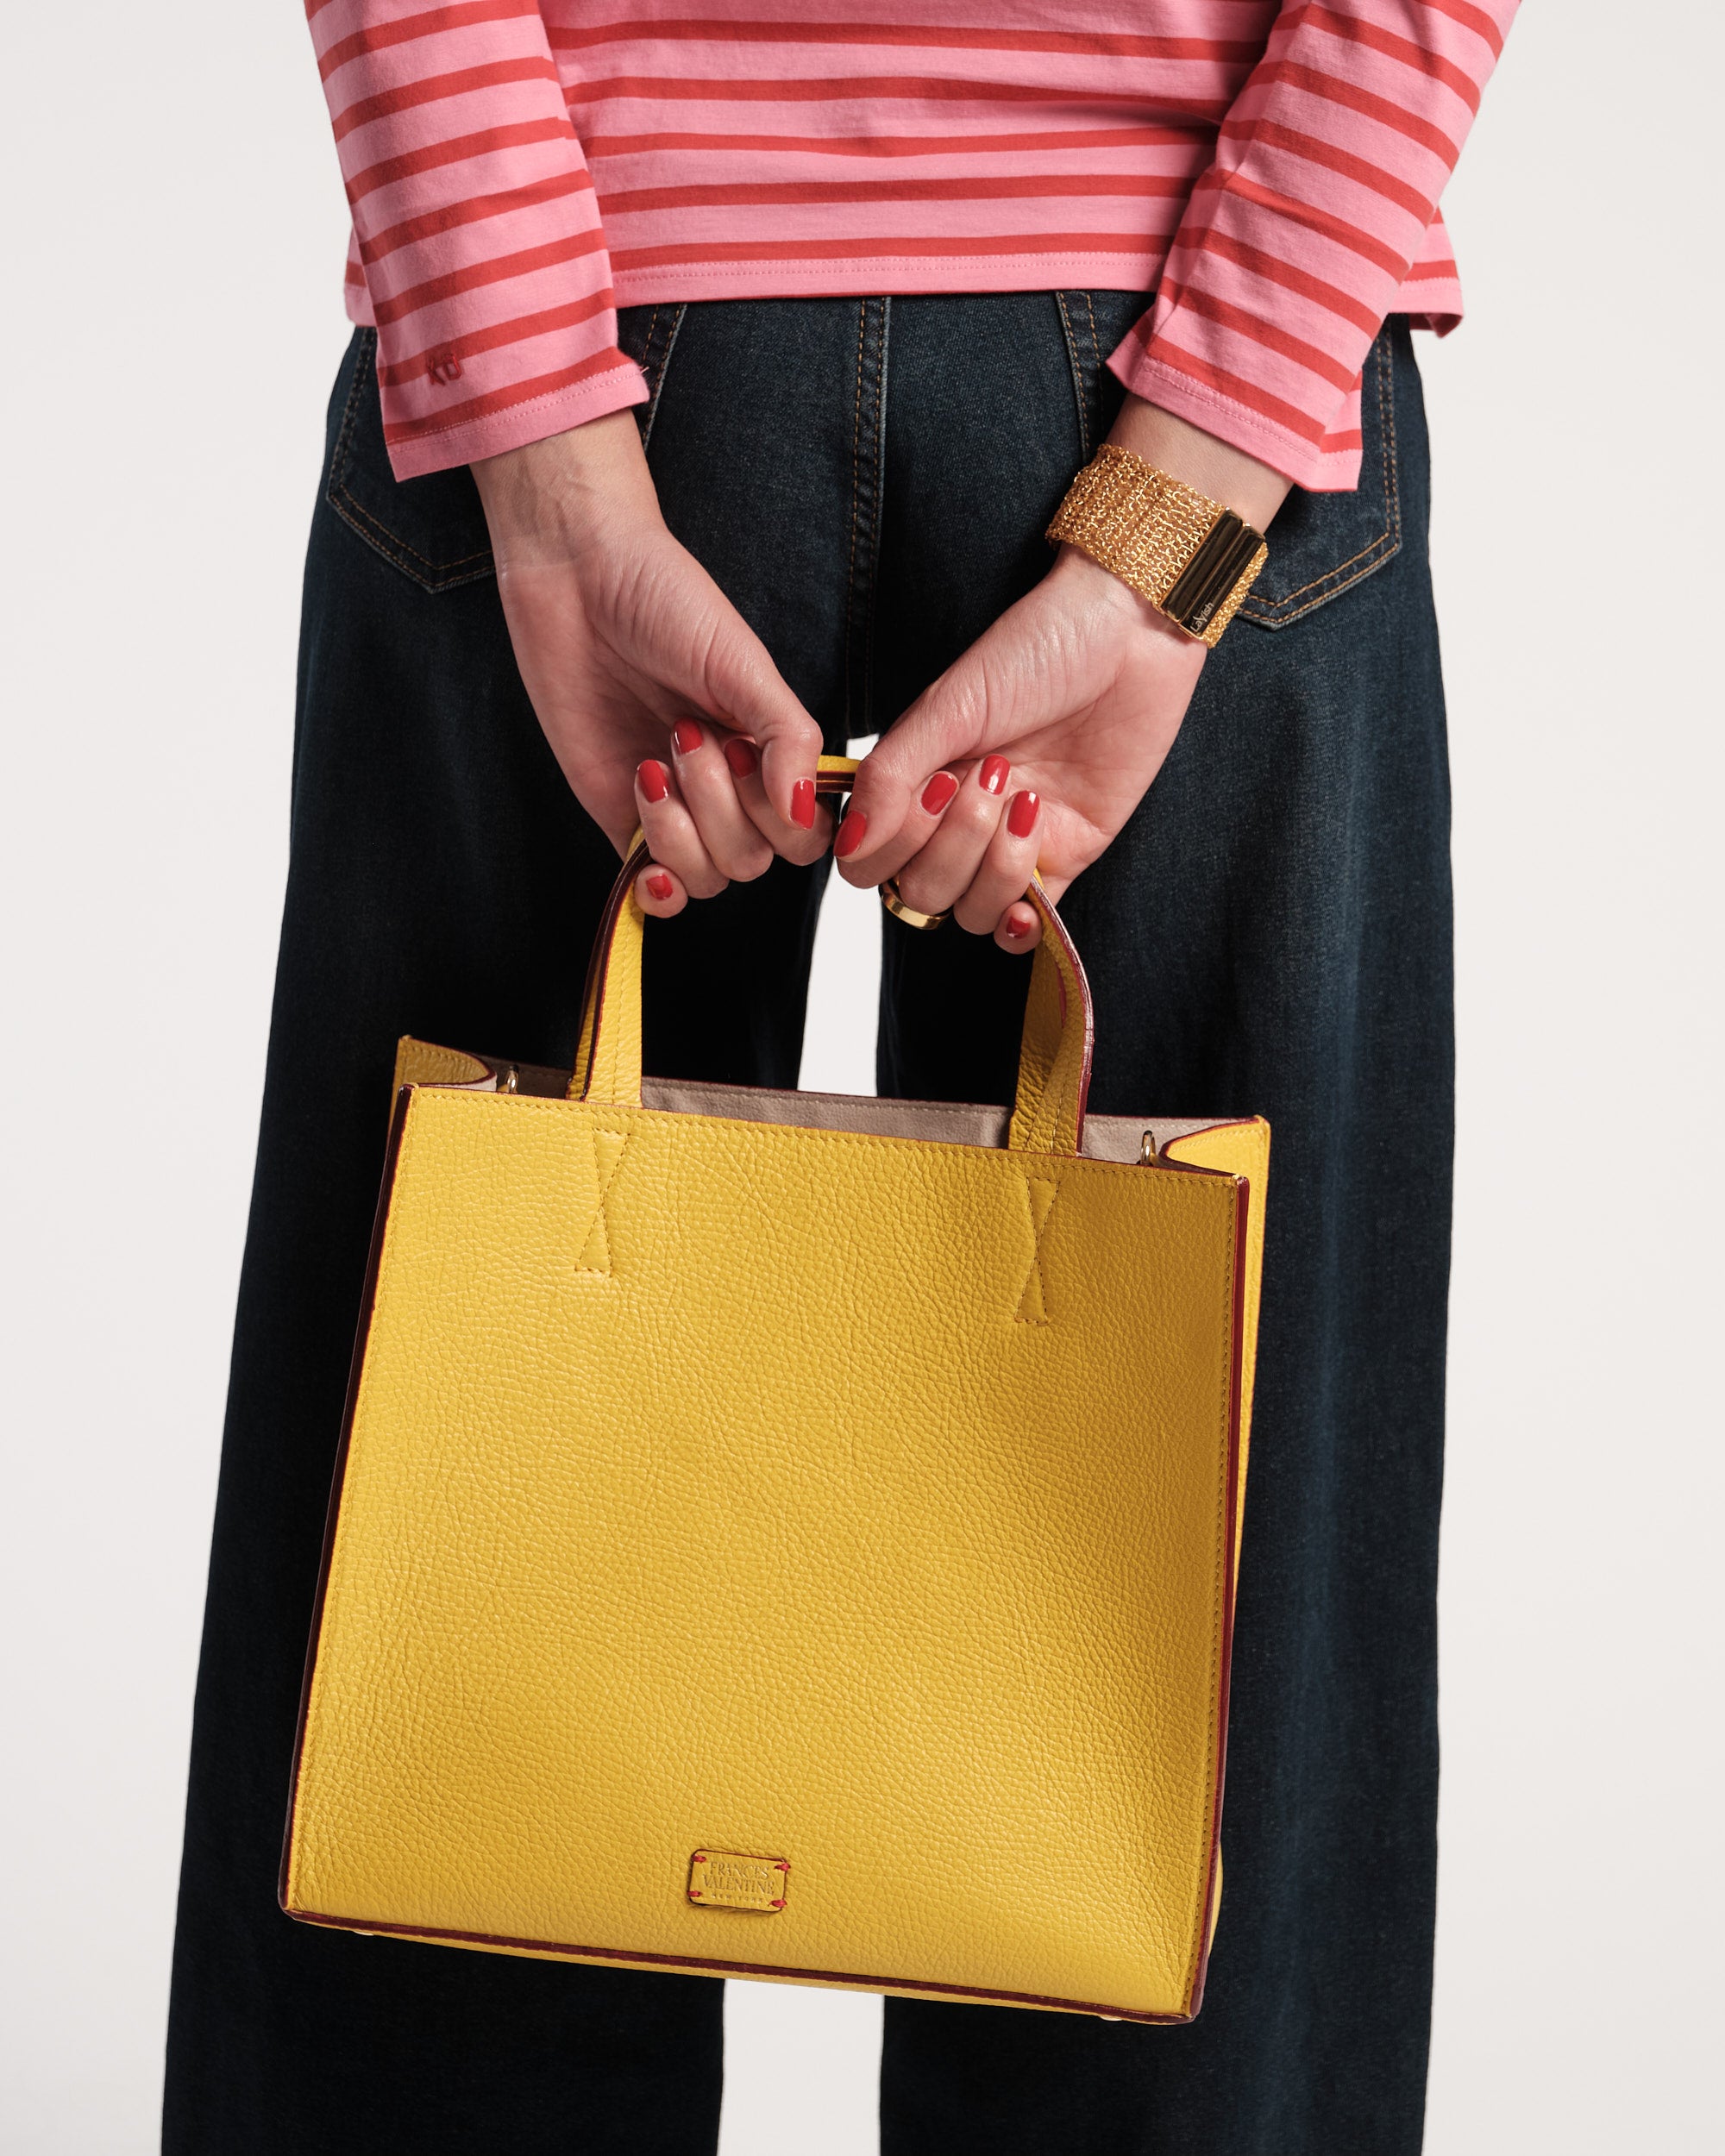 Margo Tote Tumbled Leather Canary